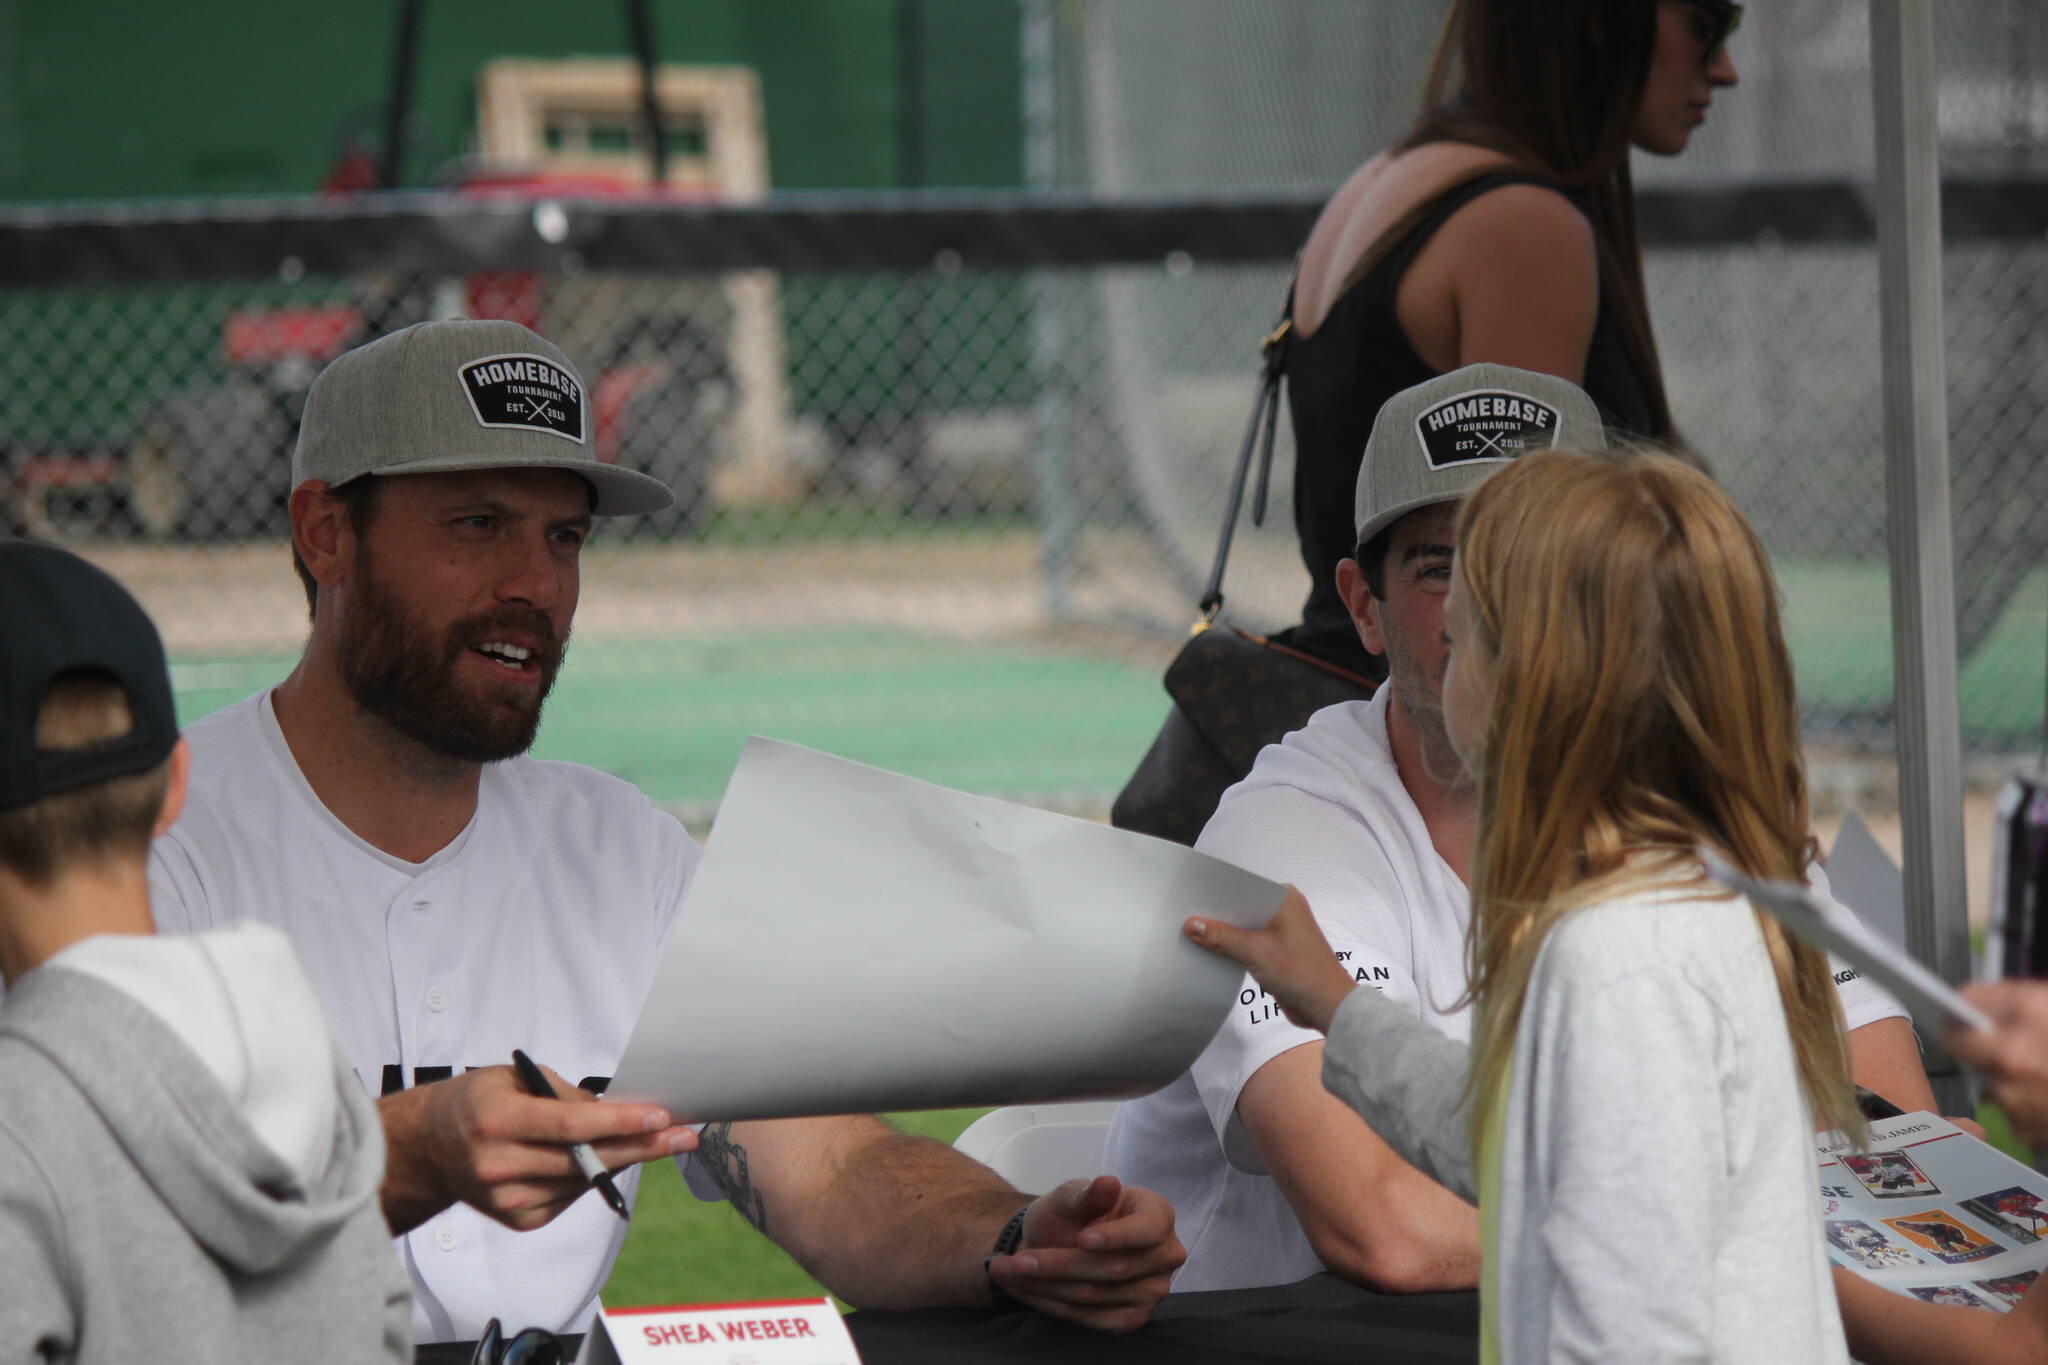 Shea Weber signs an autograph at the 2022 Homebase tournament. (Jake Courtepatte/Capital News)